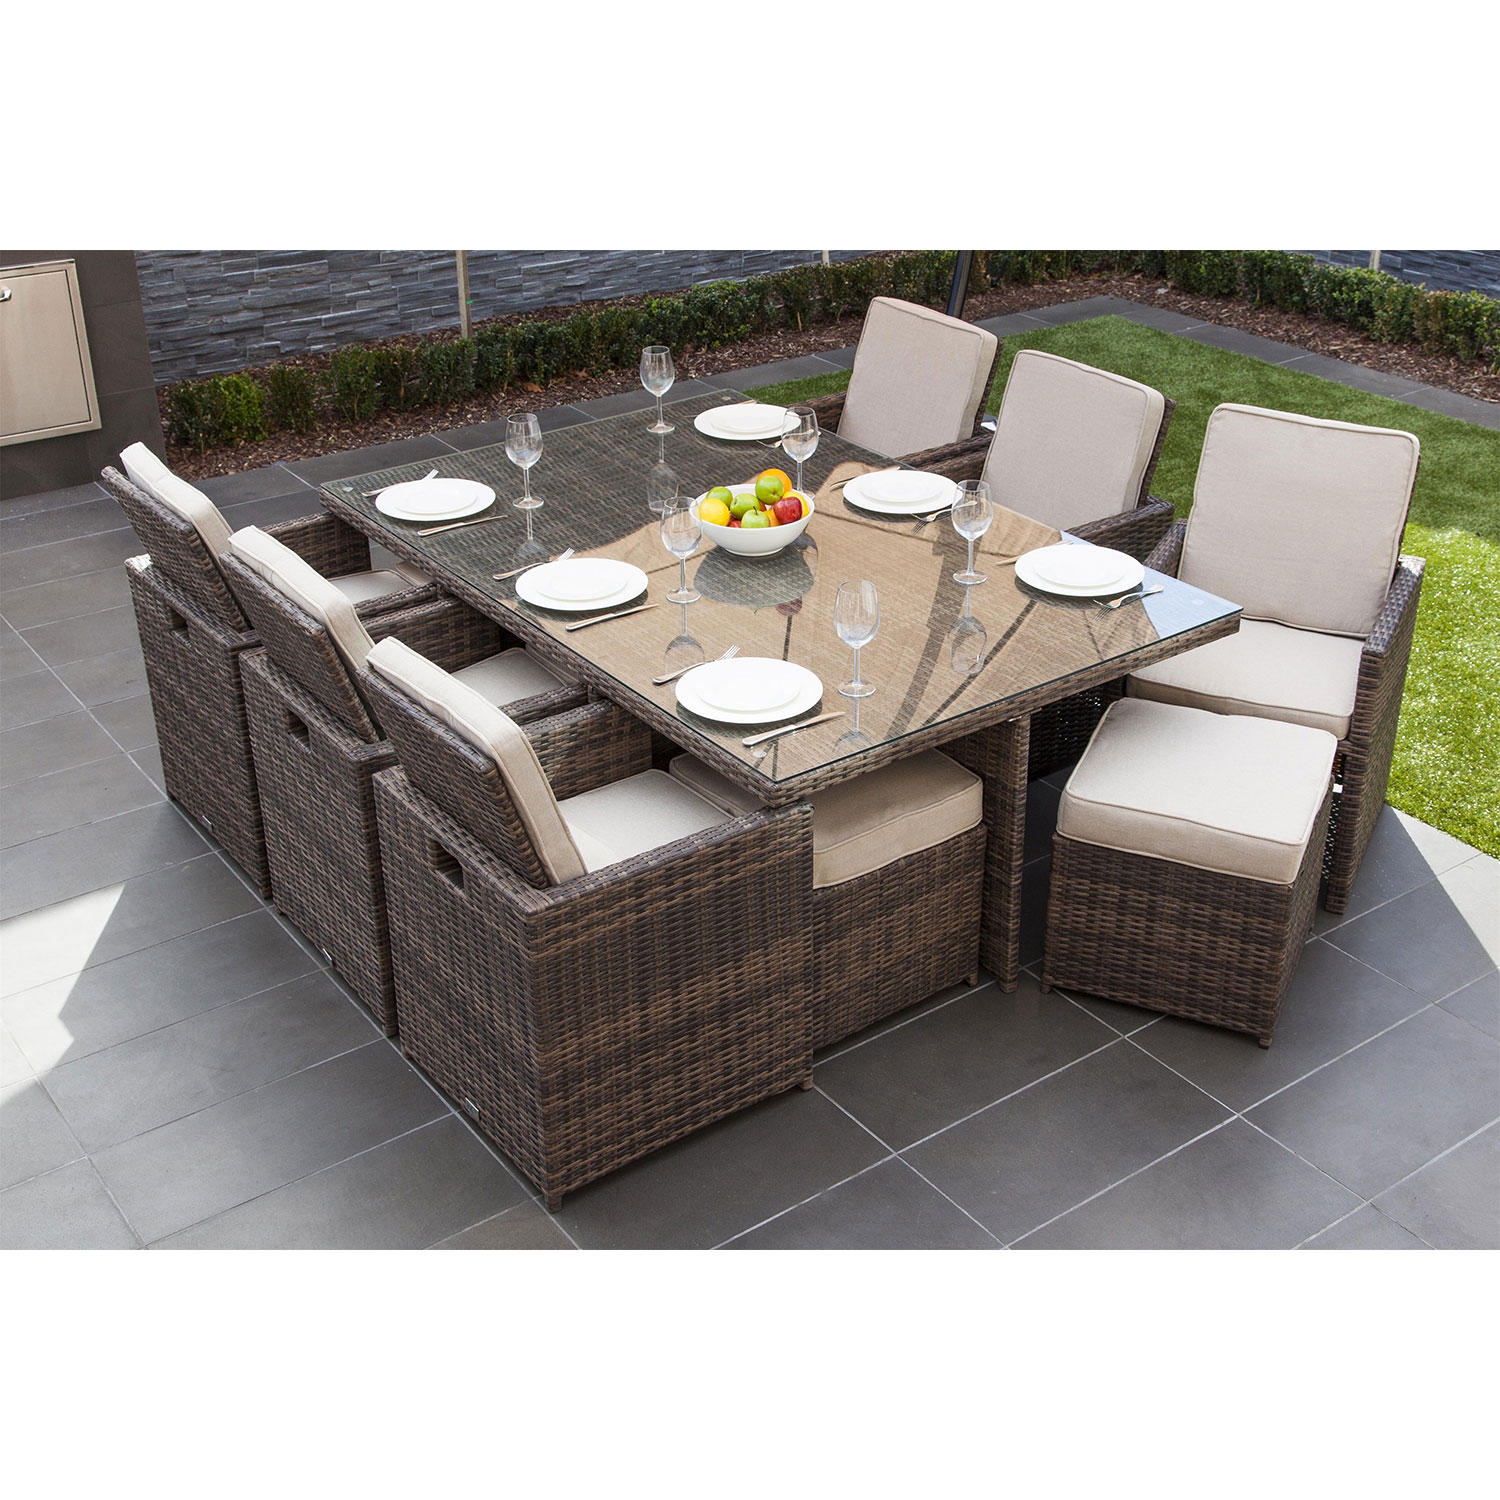 Moda Furnishings Andrea 11-Piece Patio Dining Set with 4 Ottomans